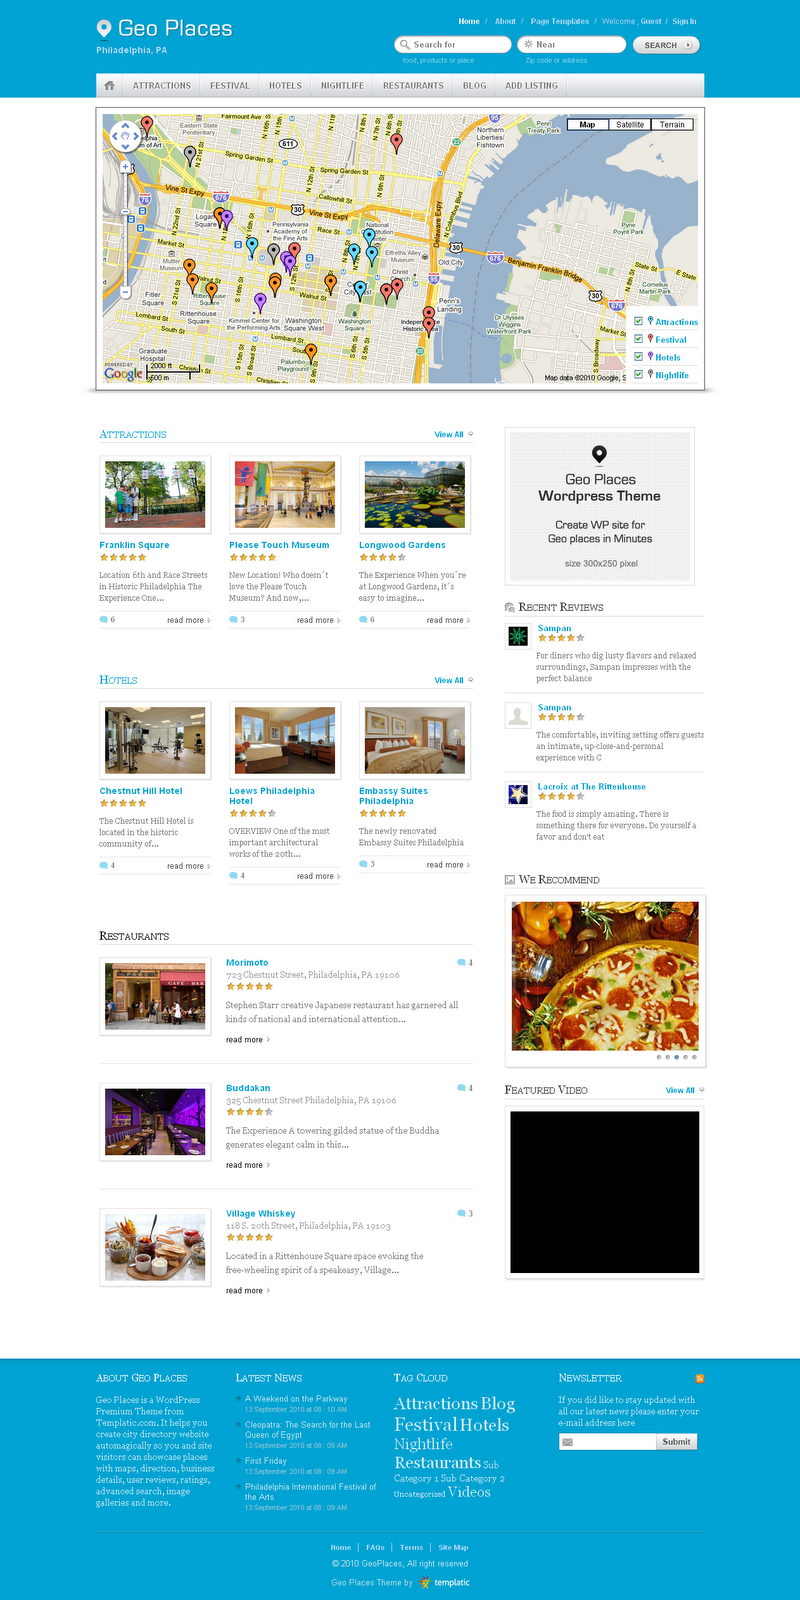 Geo Places Wordpress Theme Free Download by Templatic.